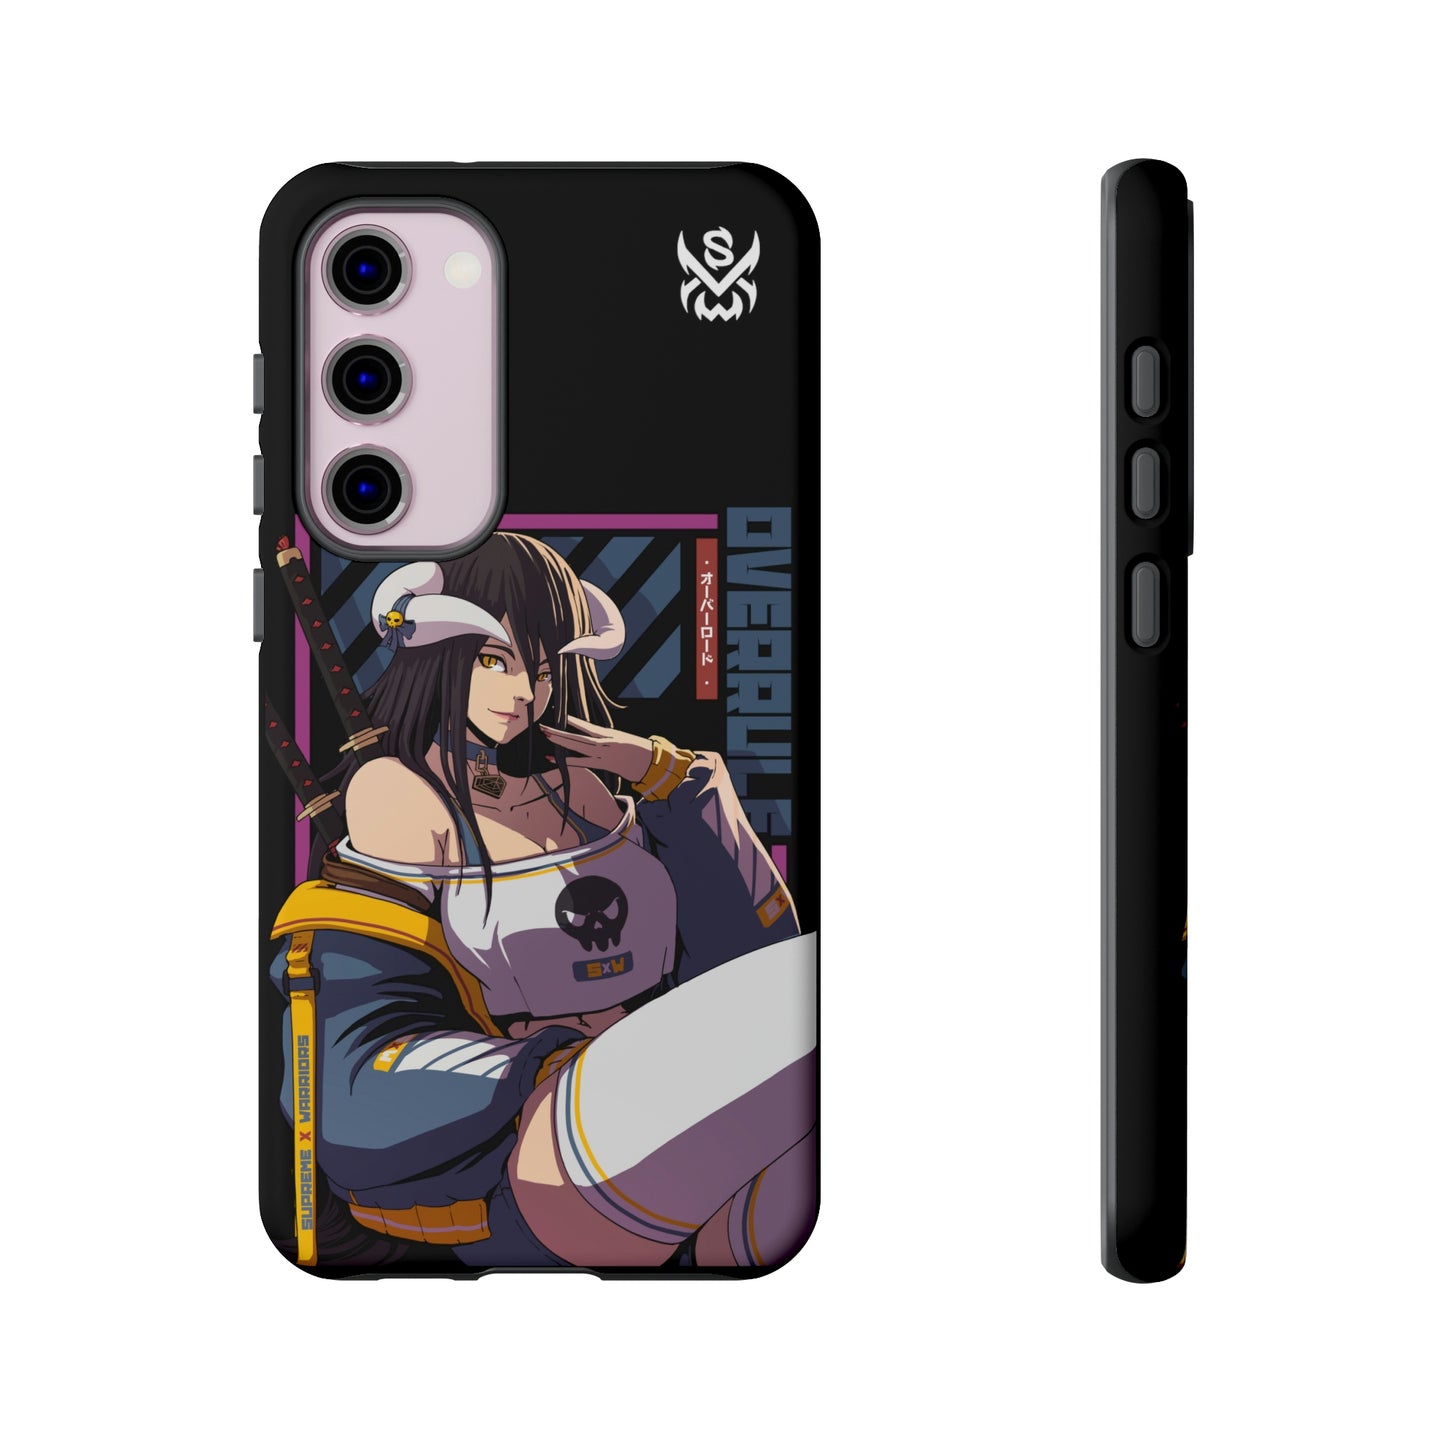 Overrule / Samsung Galaxy Phone Case - LIMITED